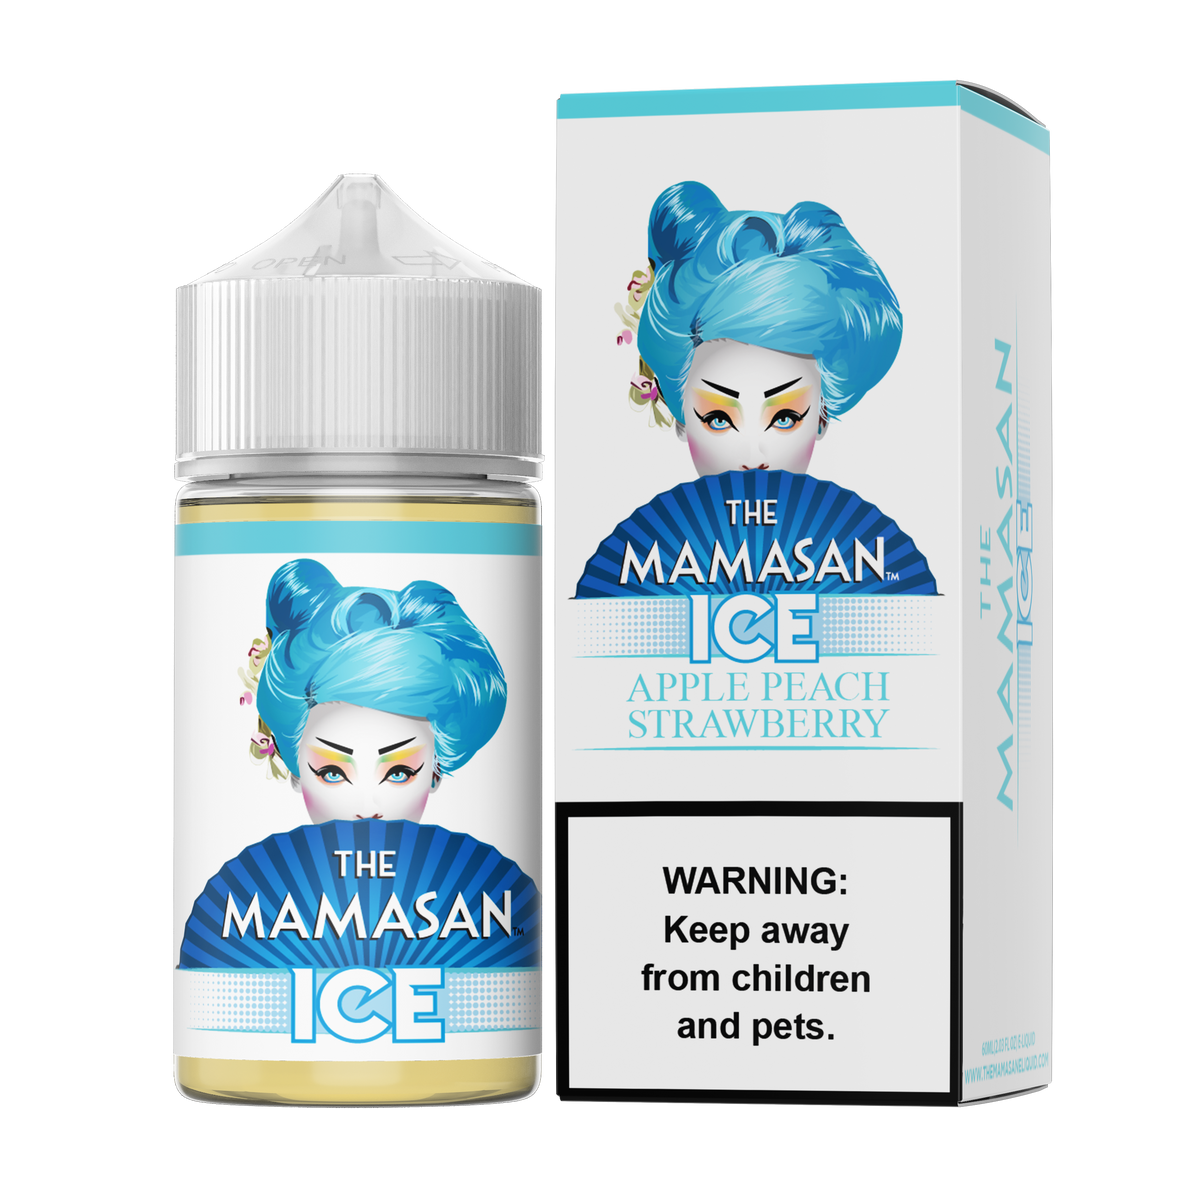 Apple Peach Strawberry Ice by The Mamasan Series 60mL with Packaging